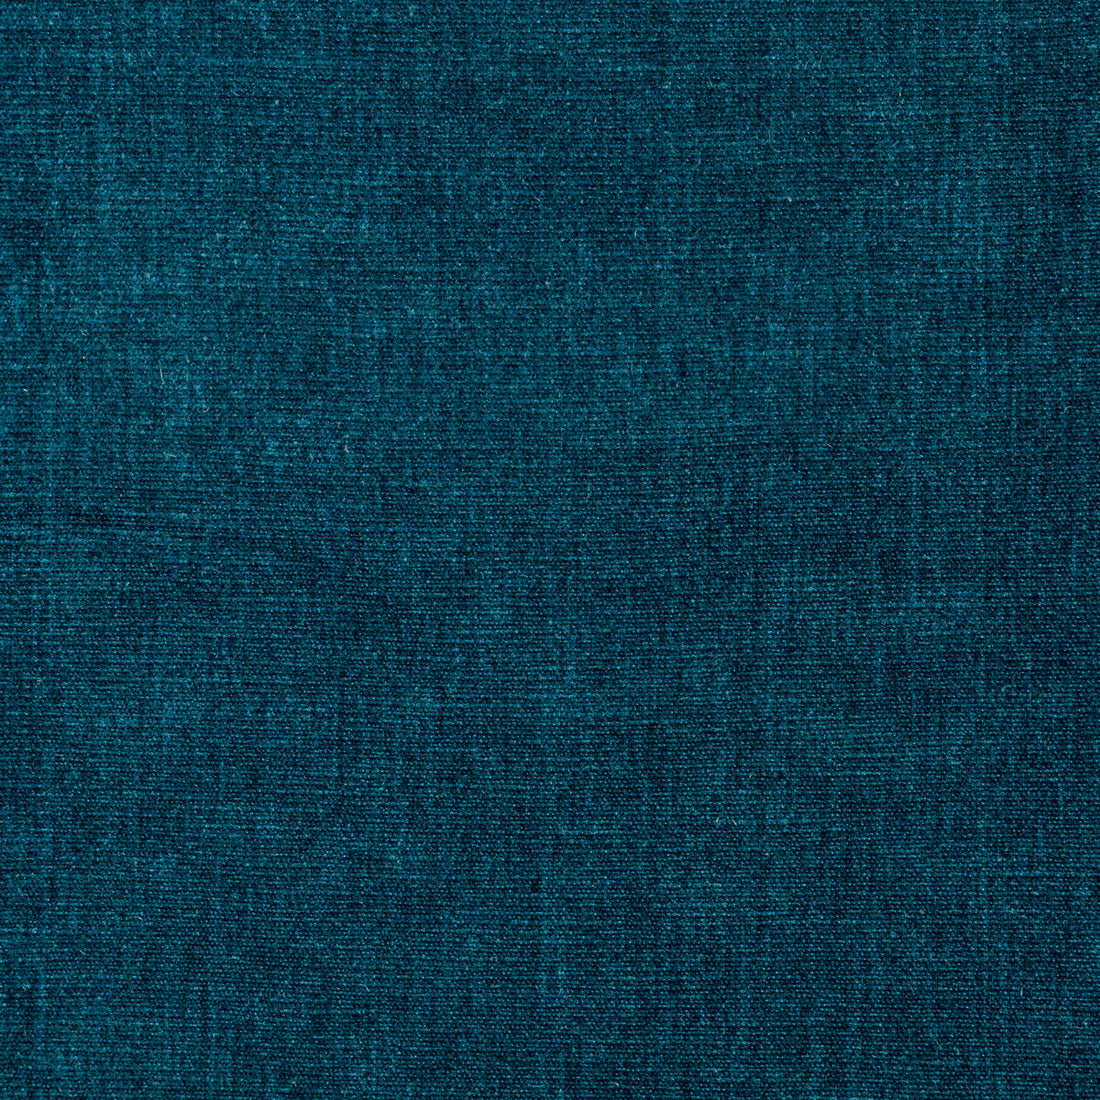 Kravet Smart fabric in 36076-515 color - pattern 36076.515.0 - by Kravet Smart in the Sumptuous Chenille II collection